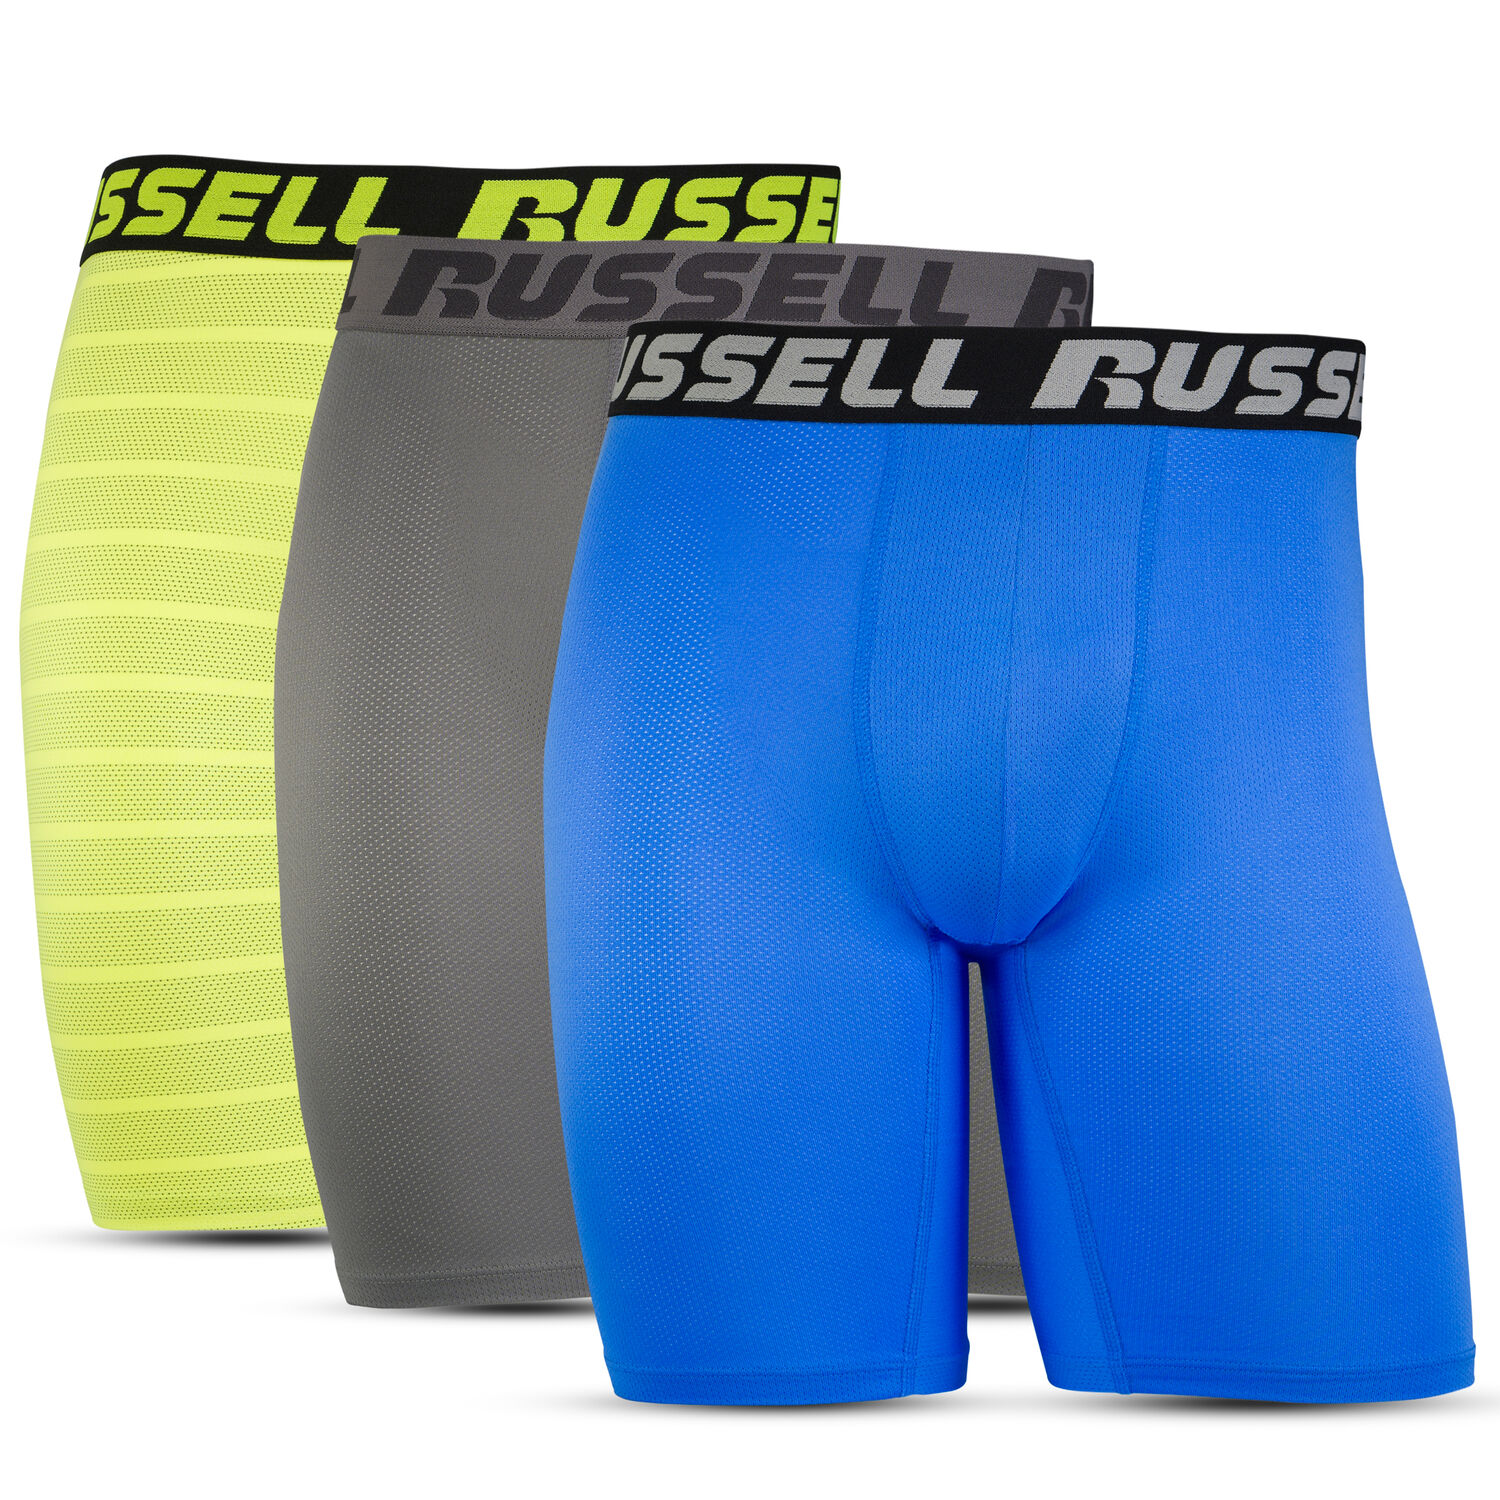 Russell Athletic Men's Boxer Briefs 12-Pack Long Leg Performance CoolForce